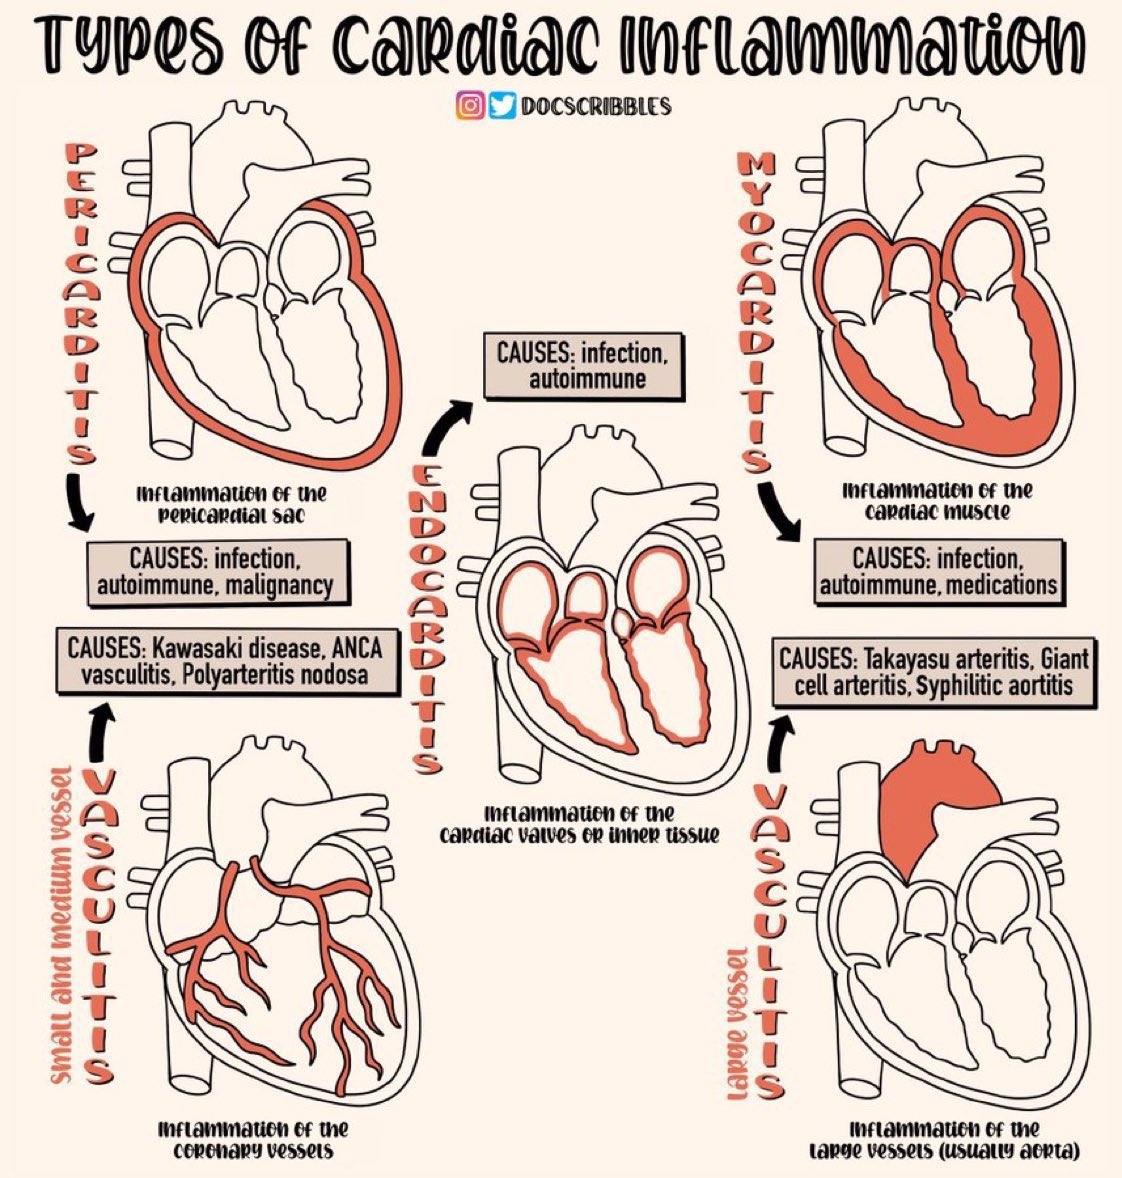 Types of cardiac inflammation Credits: @DocScribbles #MedTwitter #MedEd #CardioTwitter #CardioEd